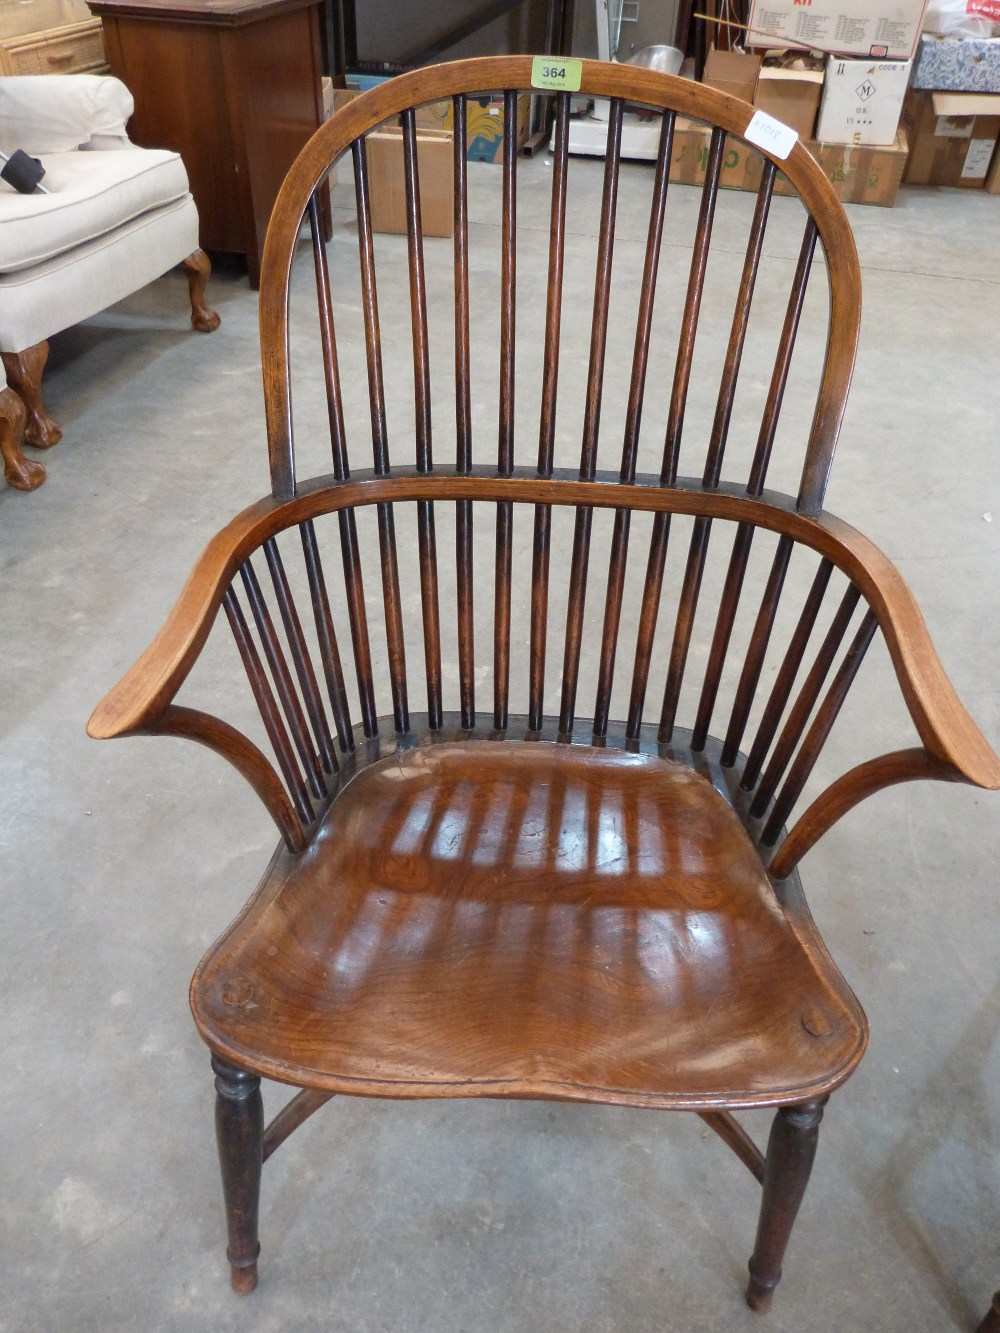 An early 19th century ash and elm Windsor elbow chair on splayed legs with crinoline stretcher